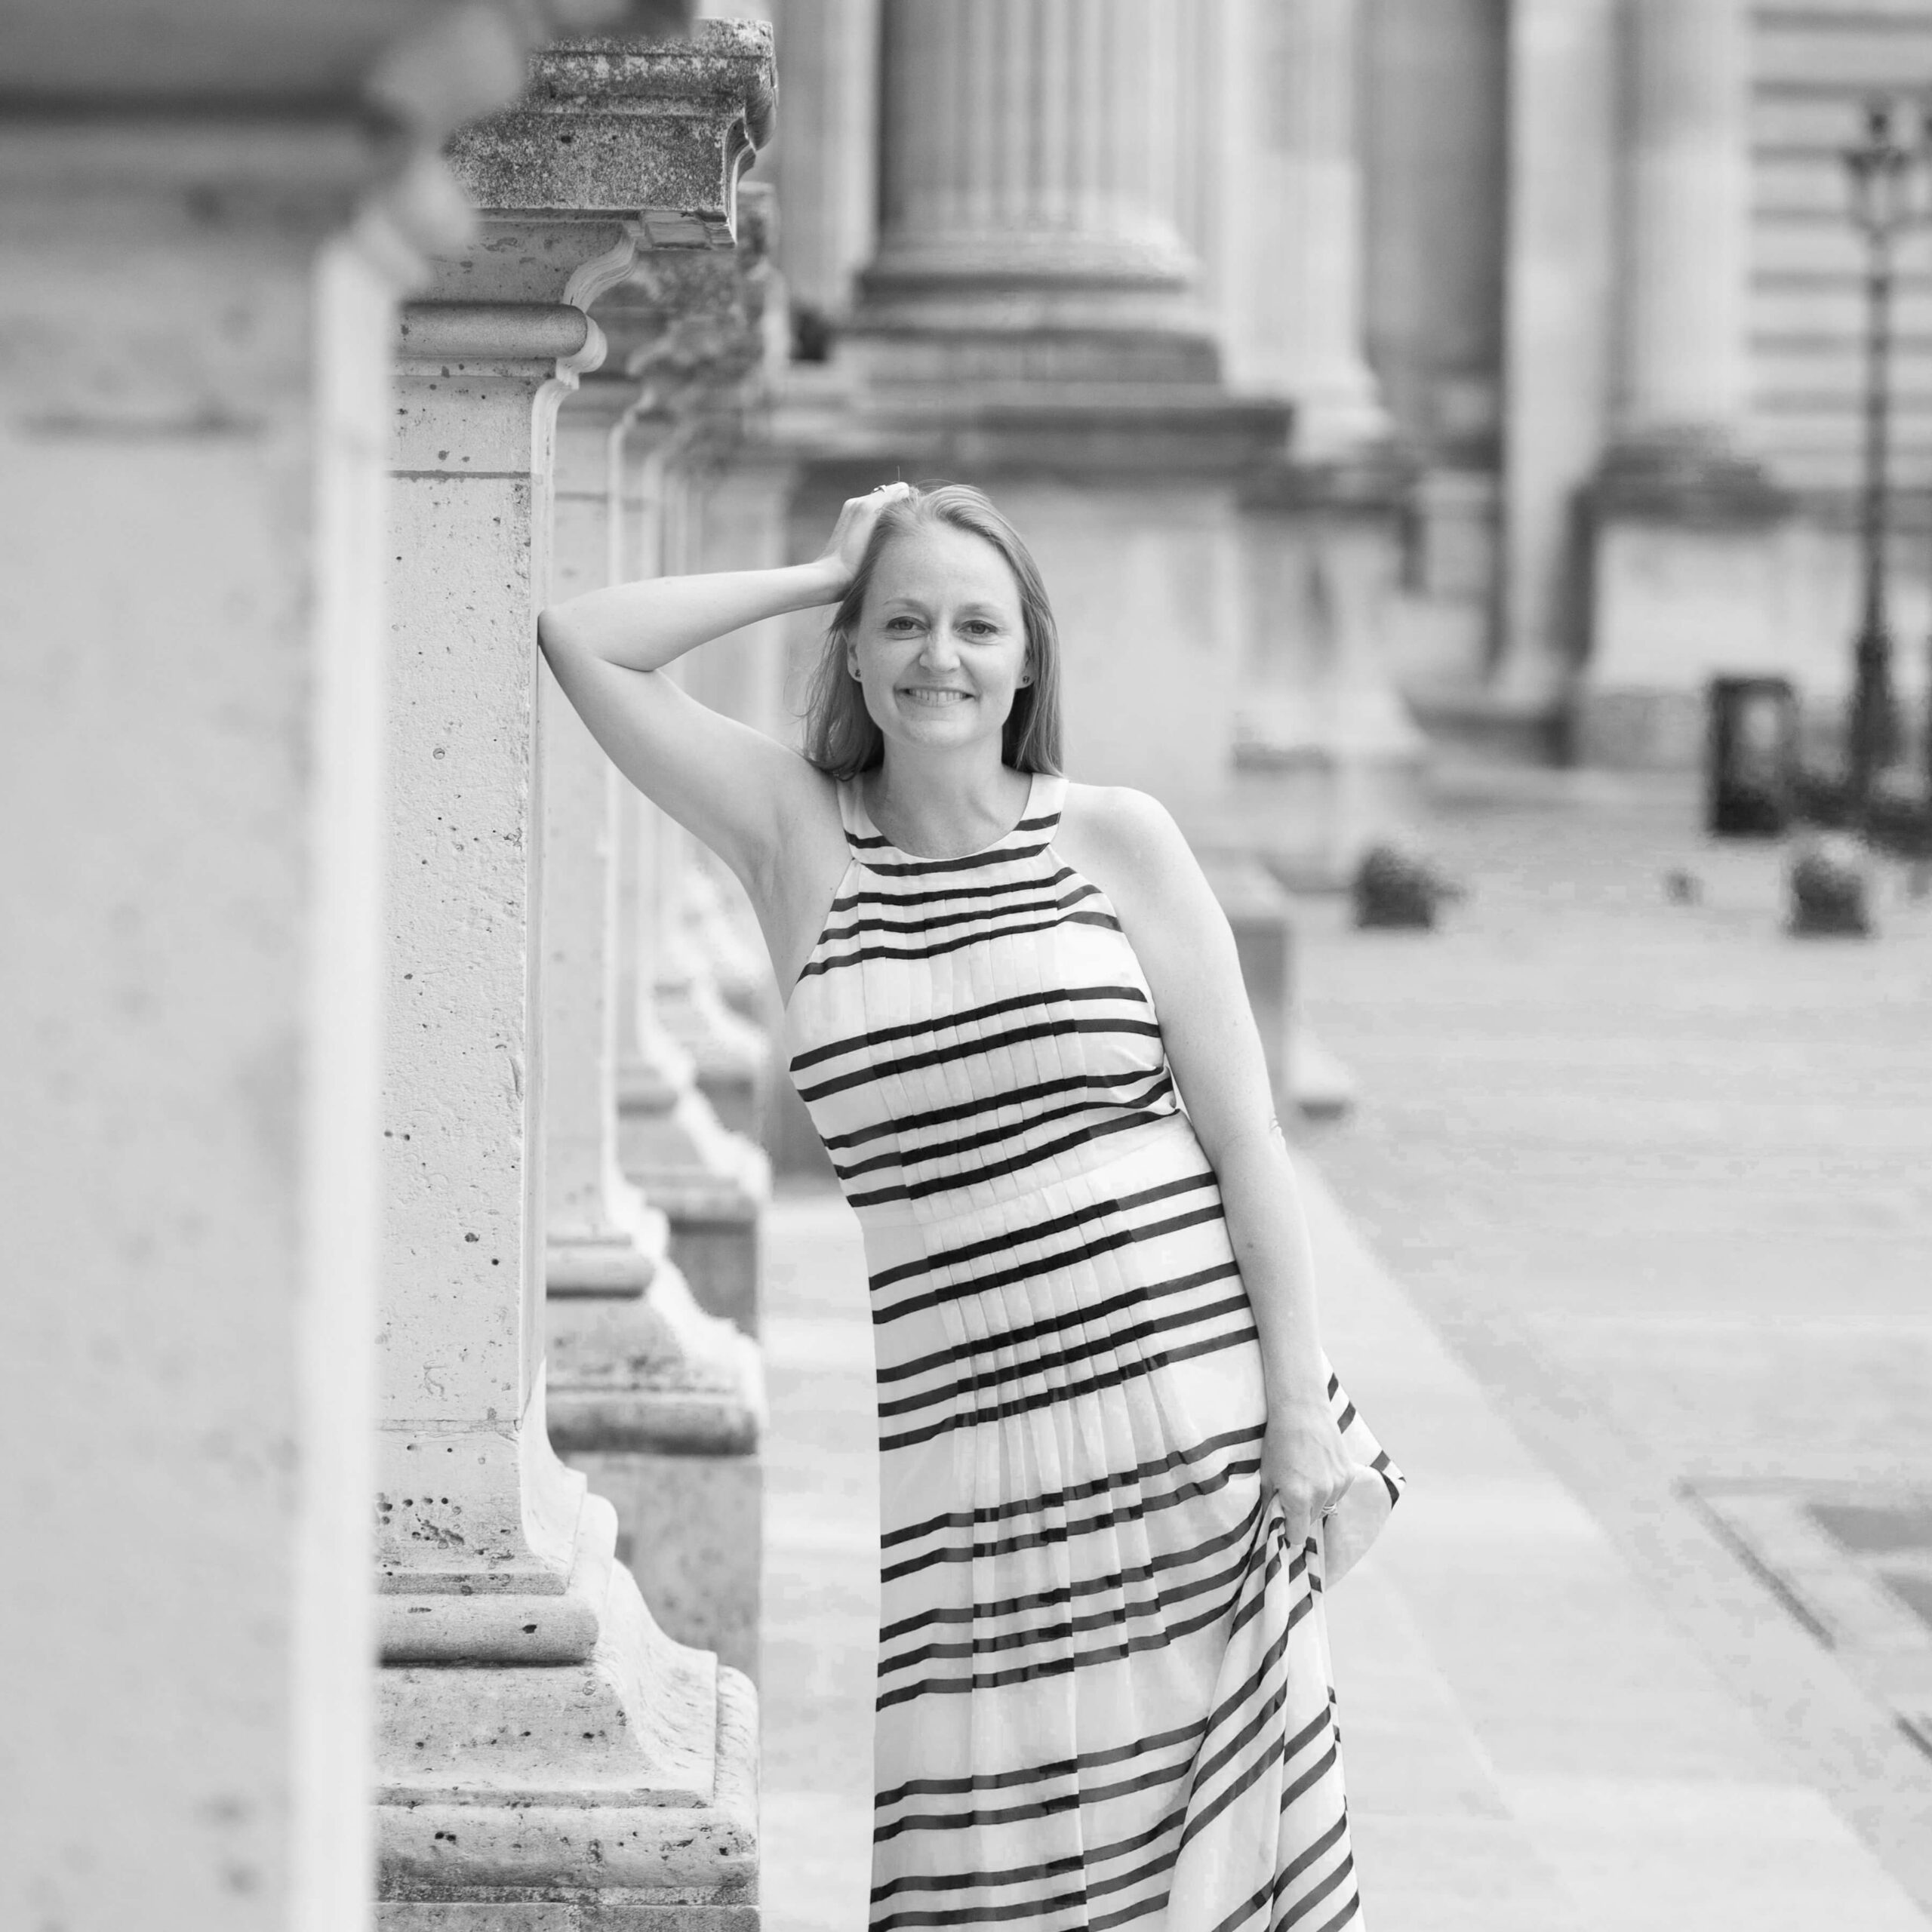 tanya quinn leading against columns in blue and white striped dress - founder of small actions greater good and COO of truby achievements